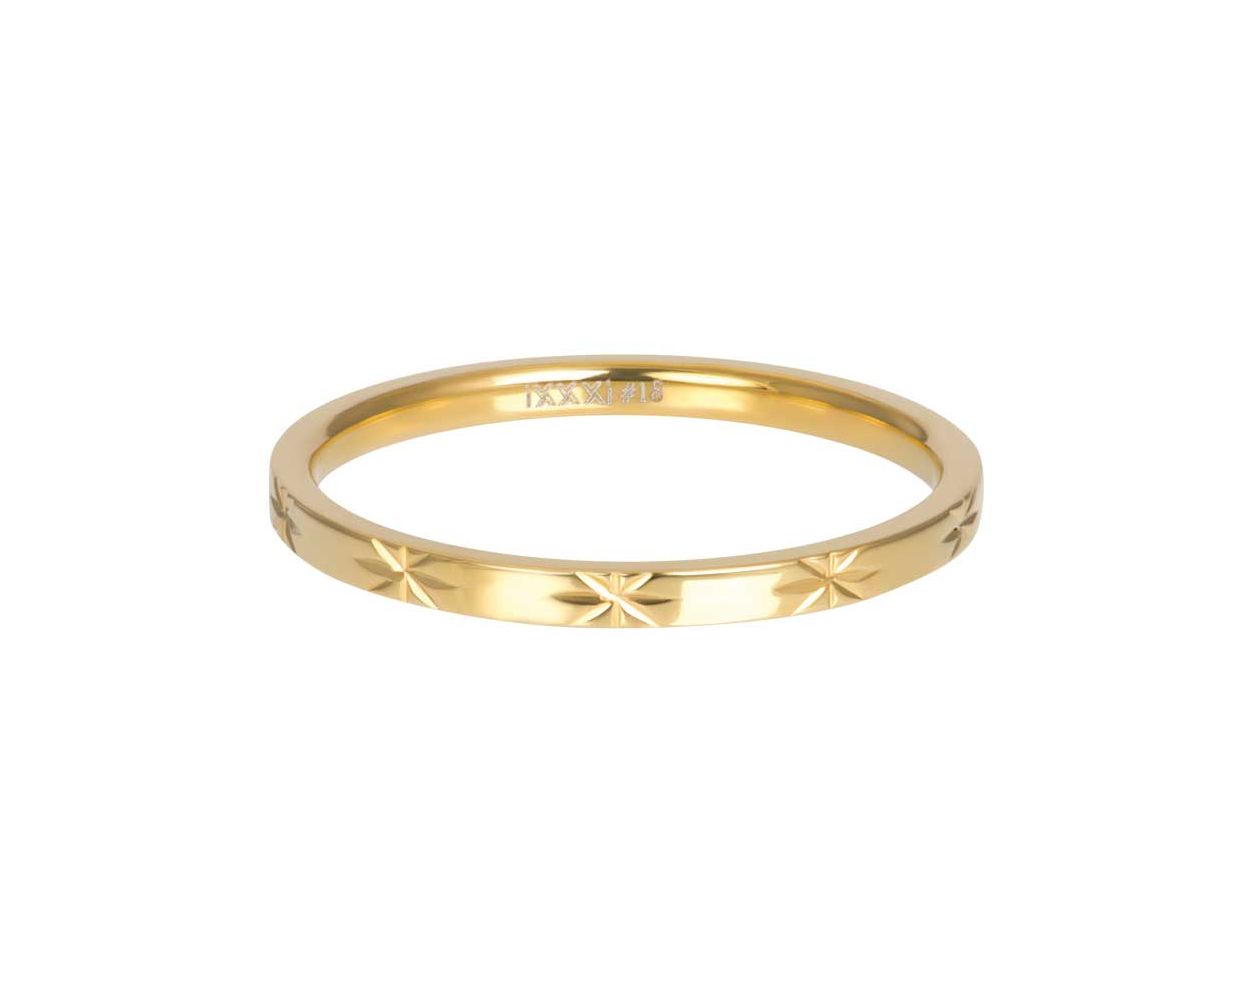 iXXXi Ring Sterre - R04902